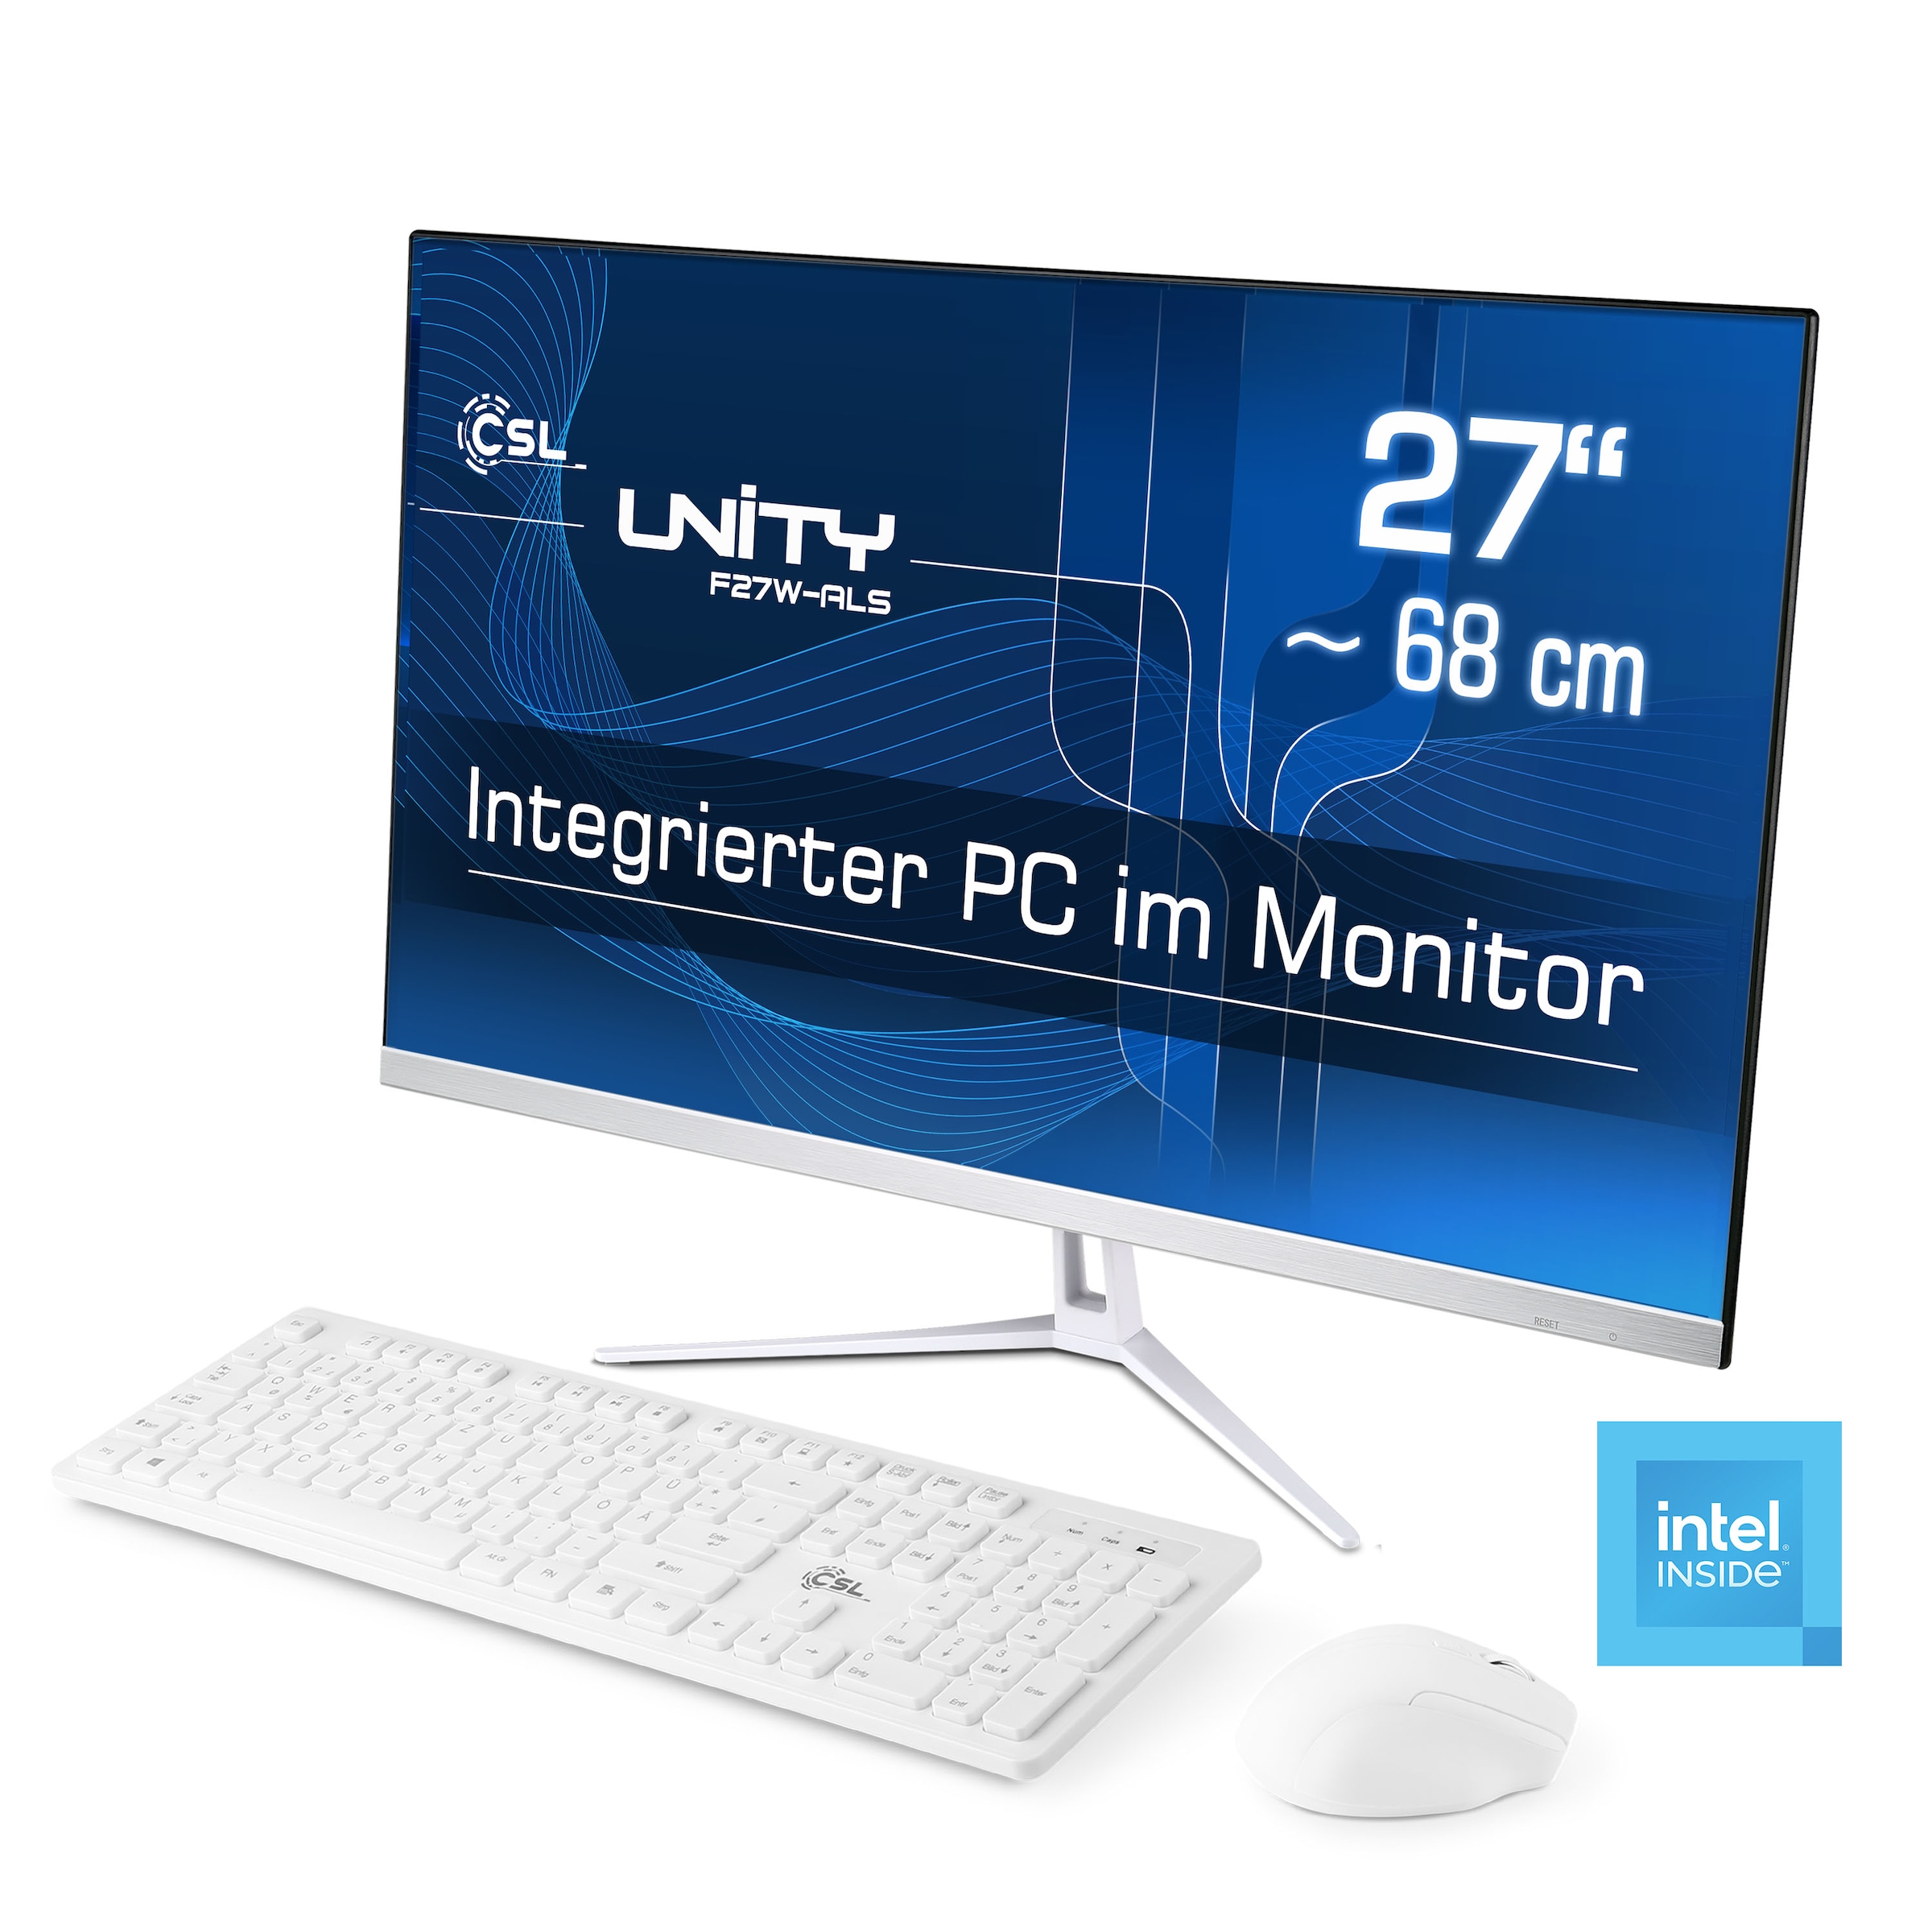 All-in-One PC »Unity F27-ALS N200 Windows 11«